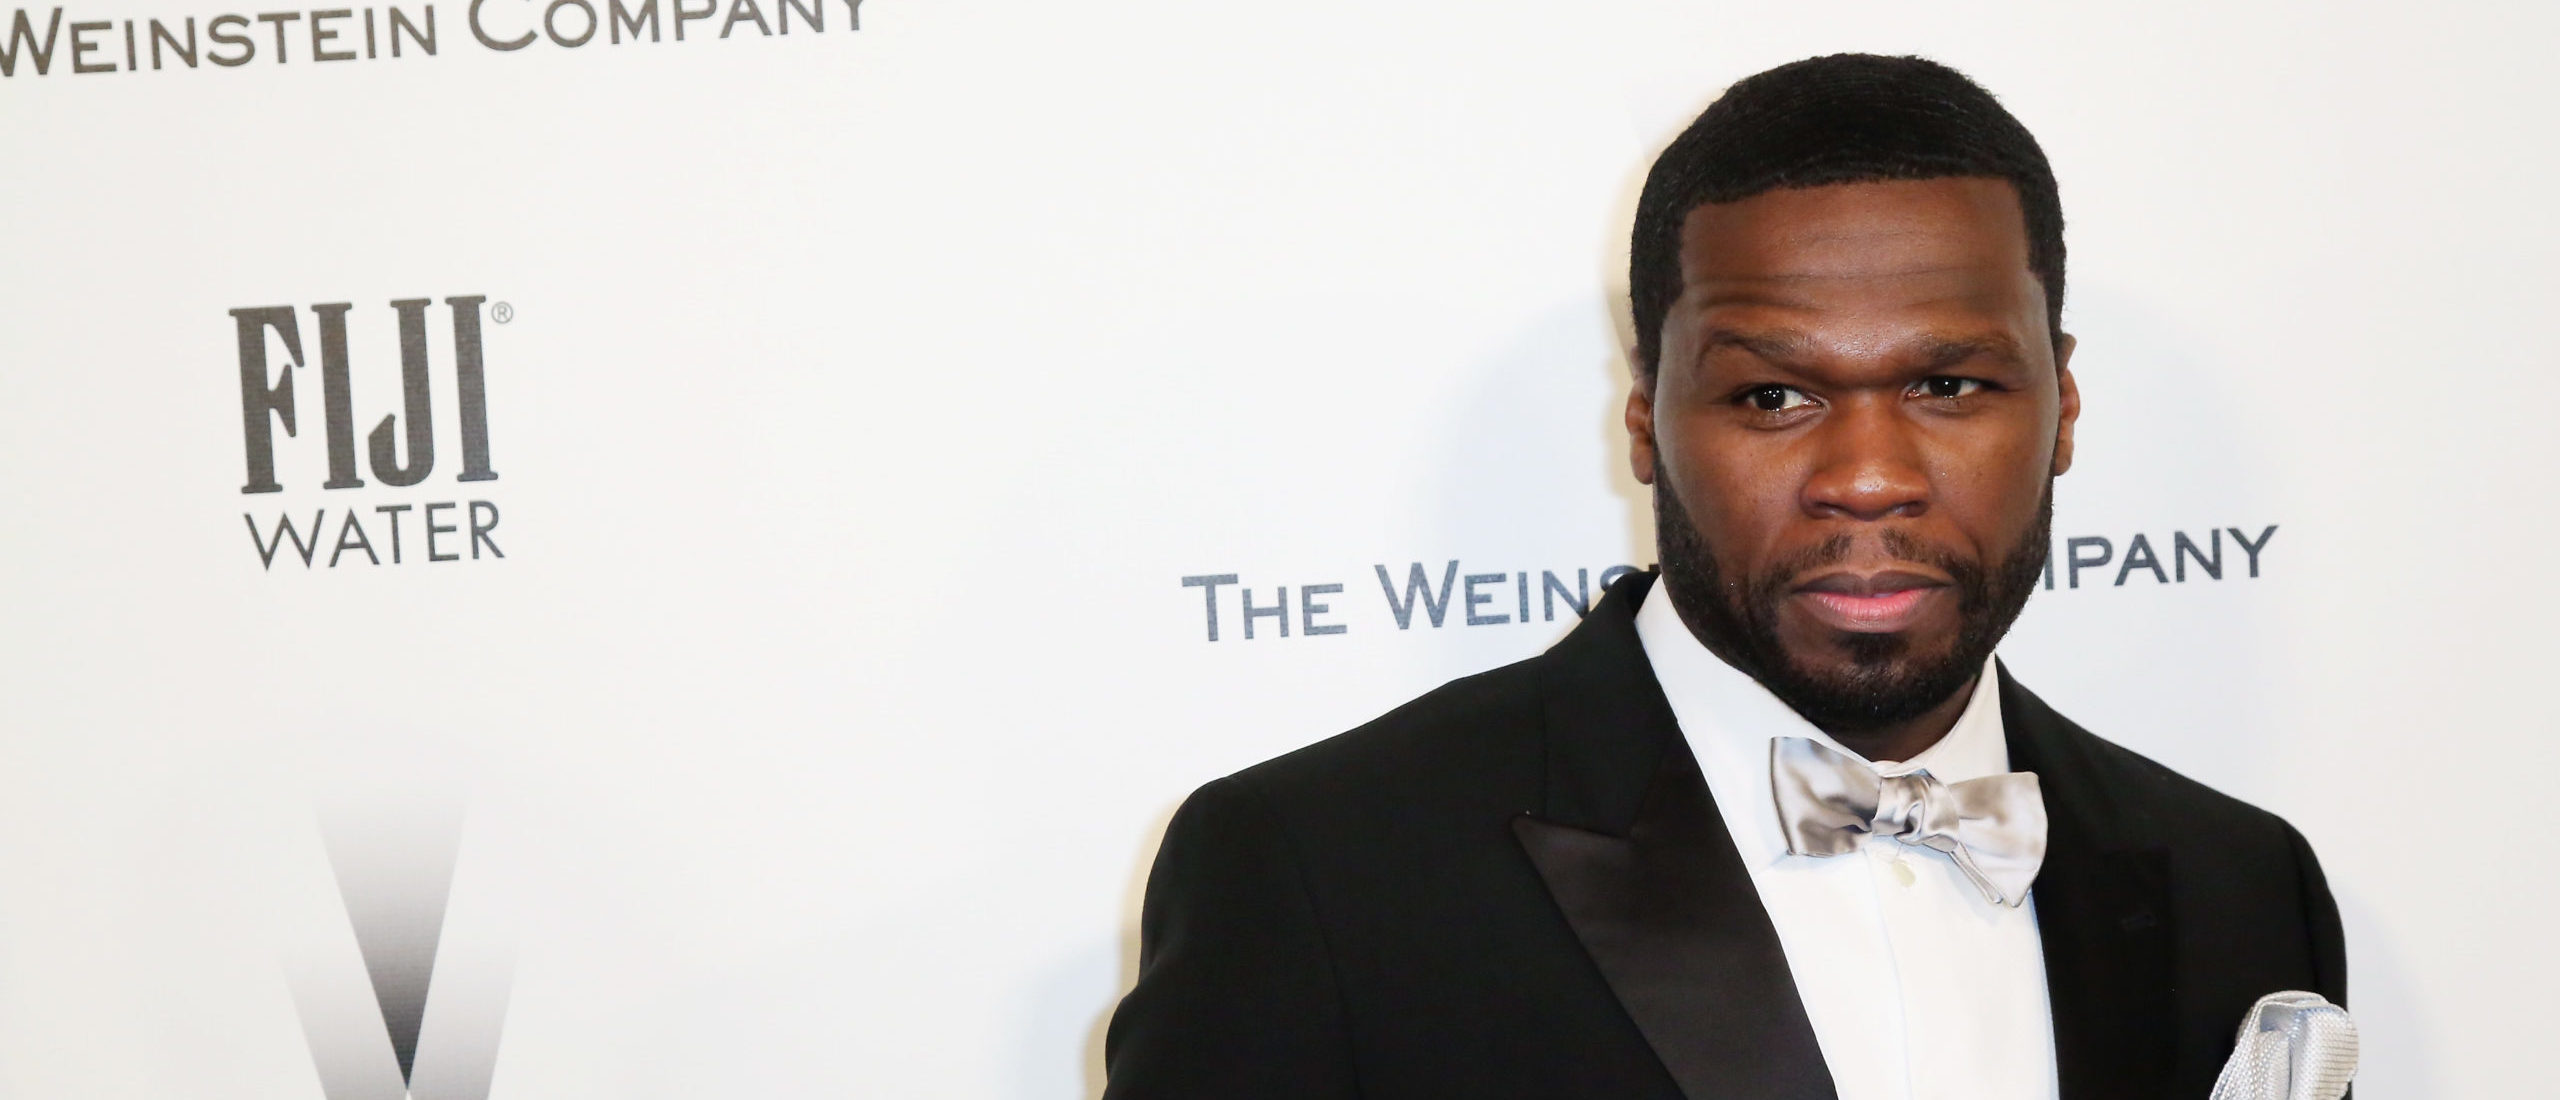 50 Cent Blasts NYC Mayor’s Migrant Policy, Softens On Trump